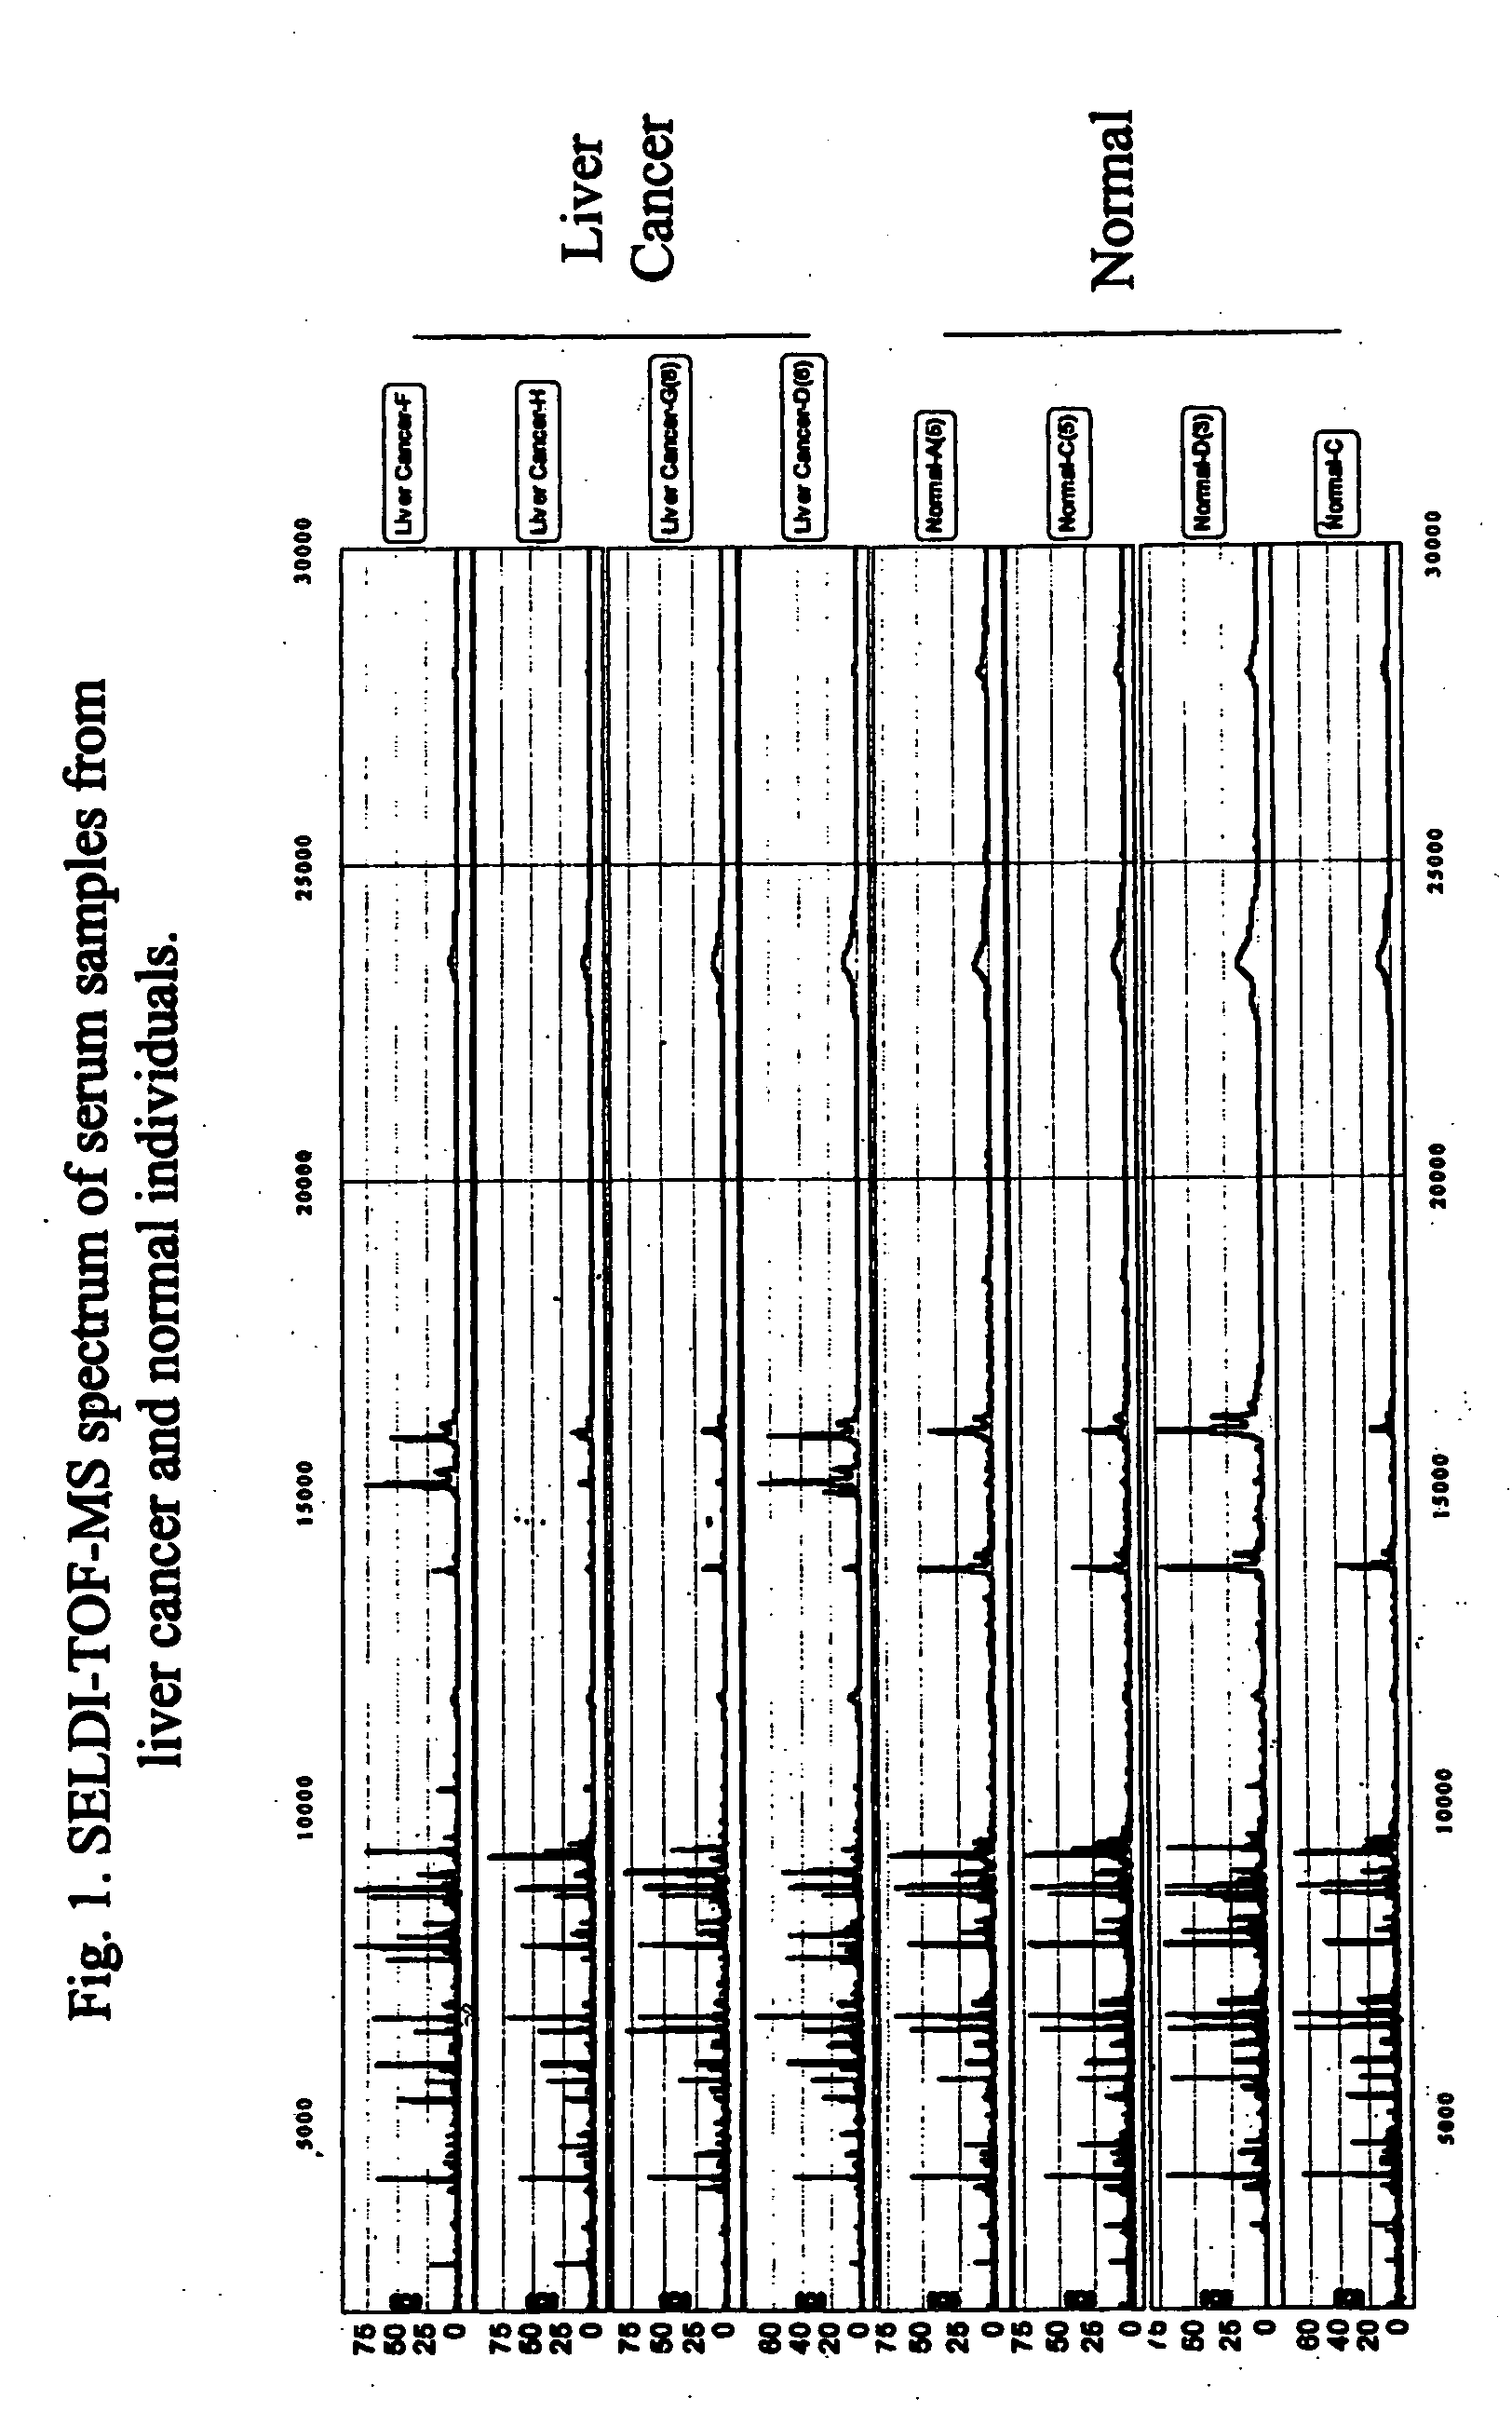 Method and compositions for detection of liver cancer